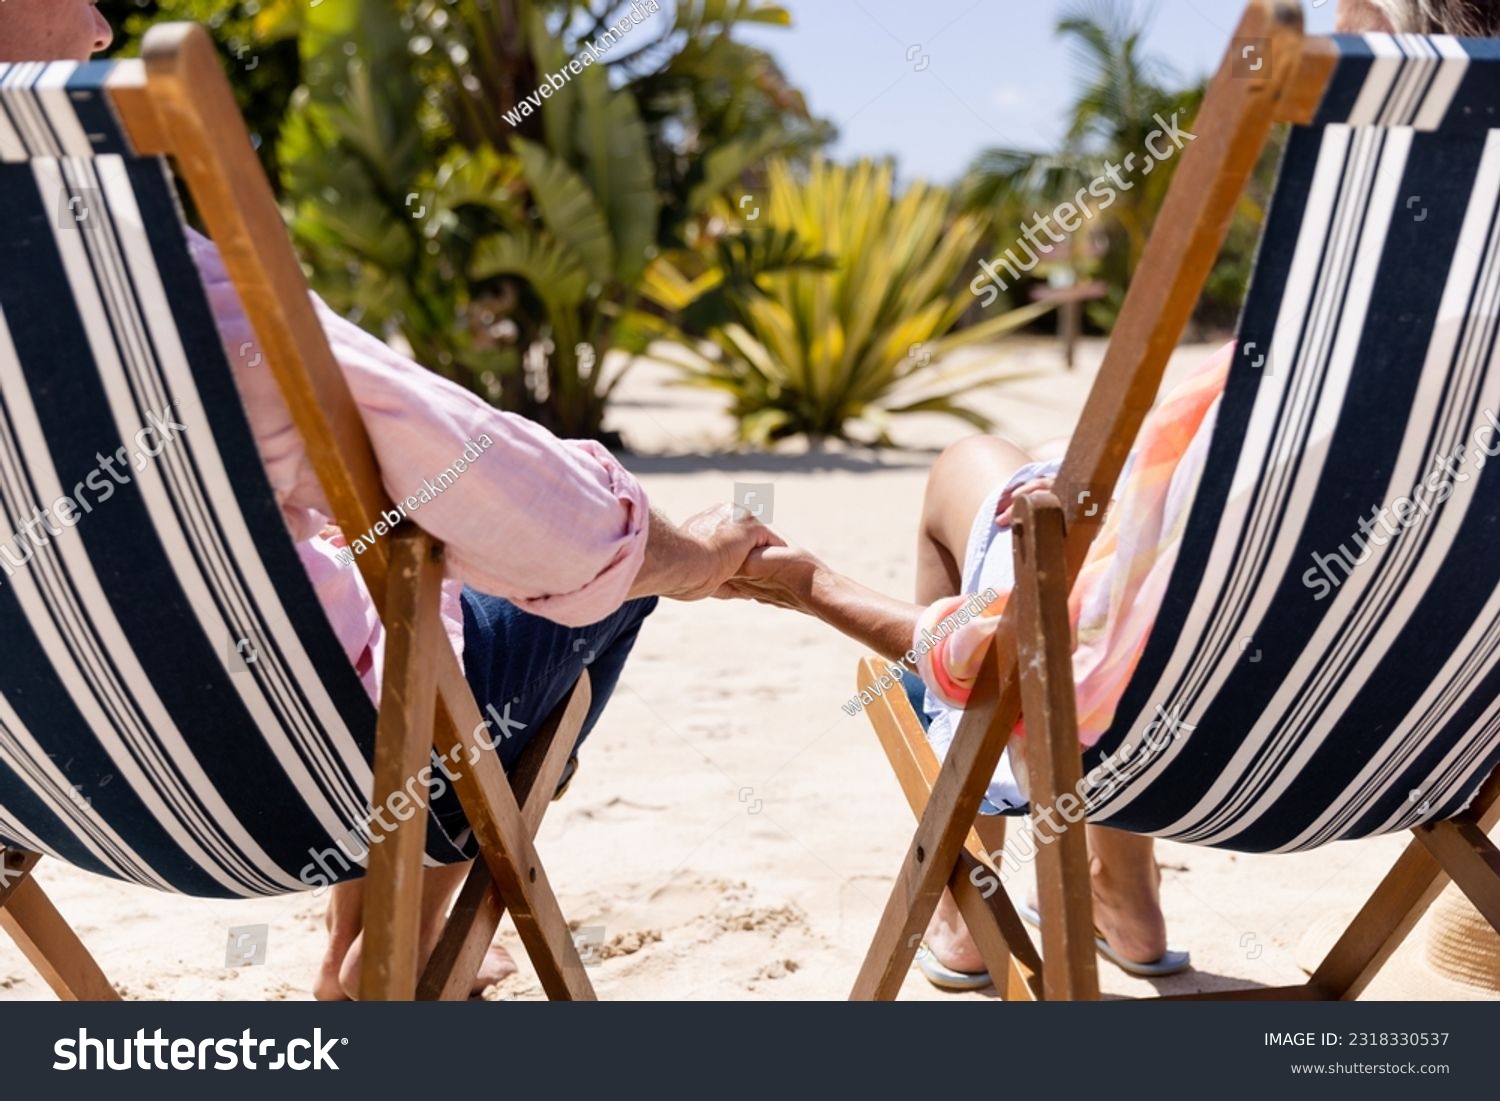 Low section of caucasian romantic senior couple holding hands and sitting on deck chairs at beach. Copy space, unaltered, retirement, vacation, love, together, enjoyment, relaxing nature and summer. #2318330537